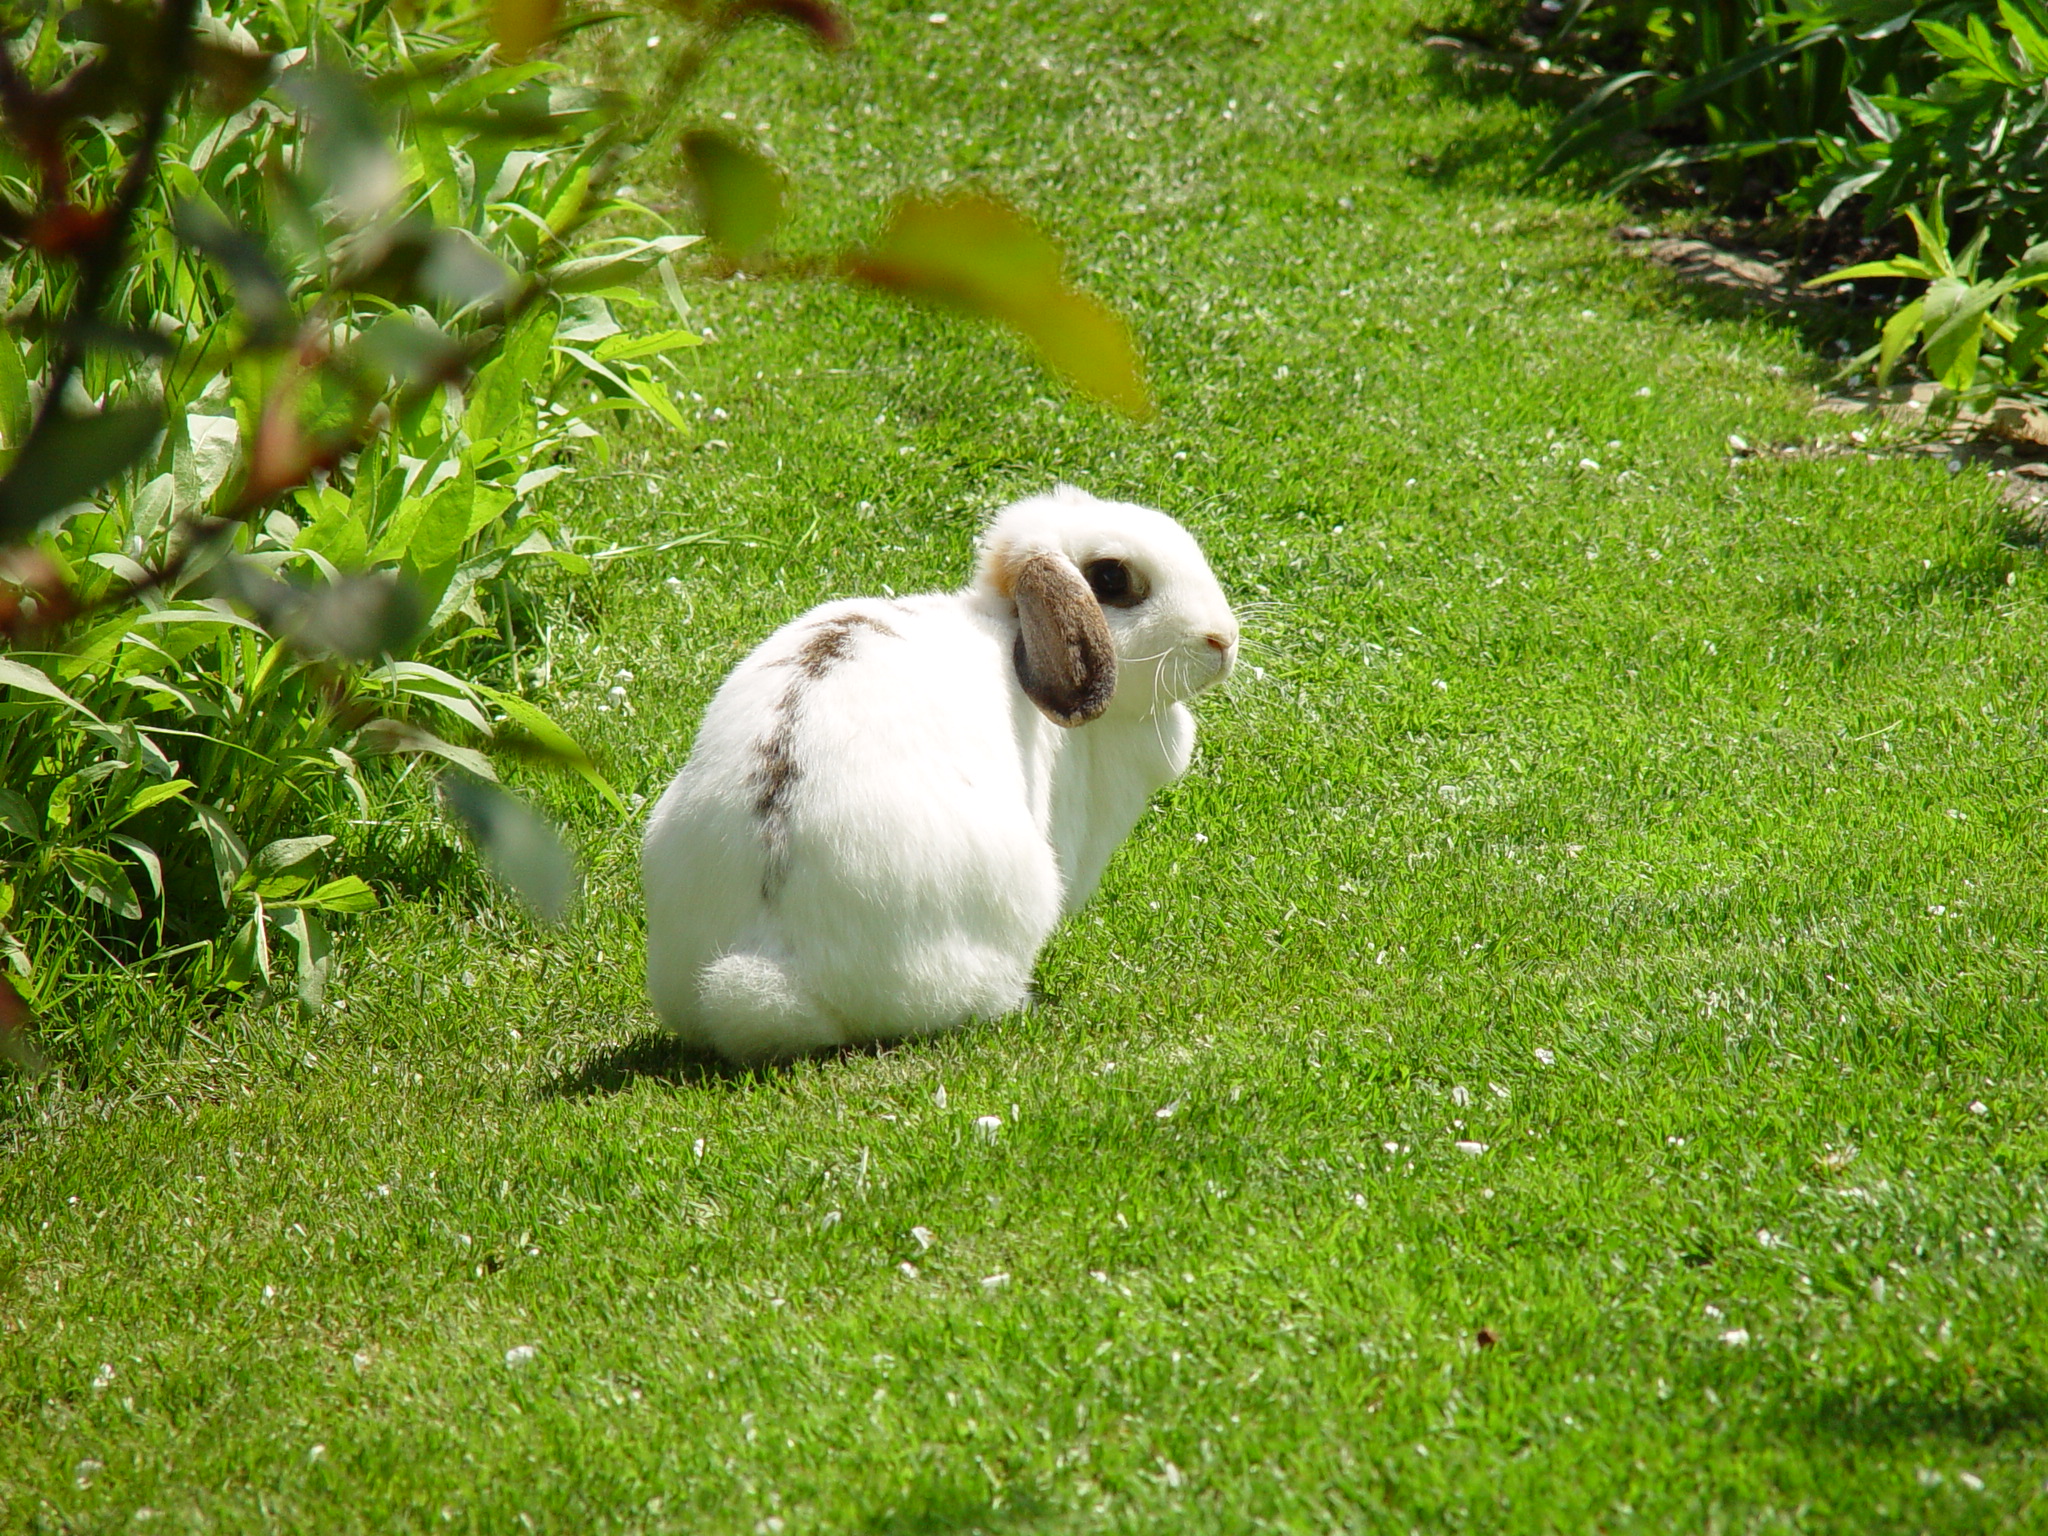 Adventurous Bunnies Explore the Lawn and Tall Grasses 1